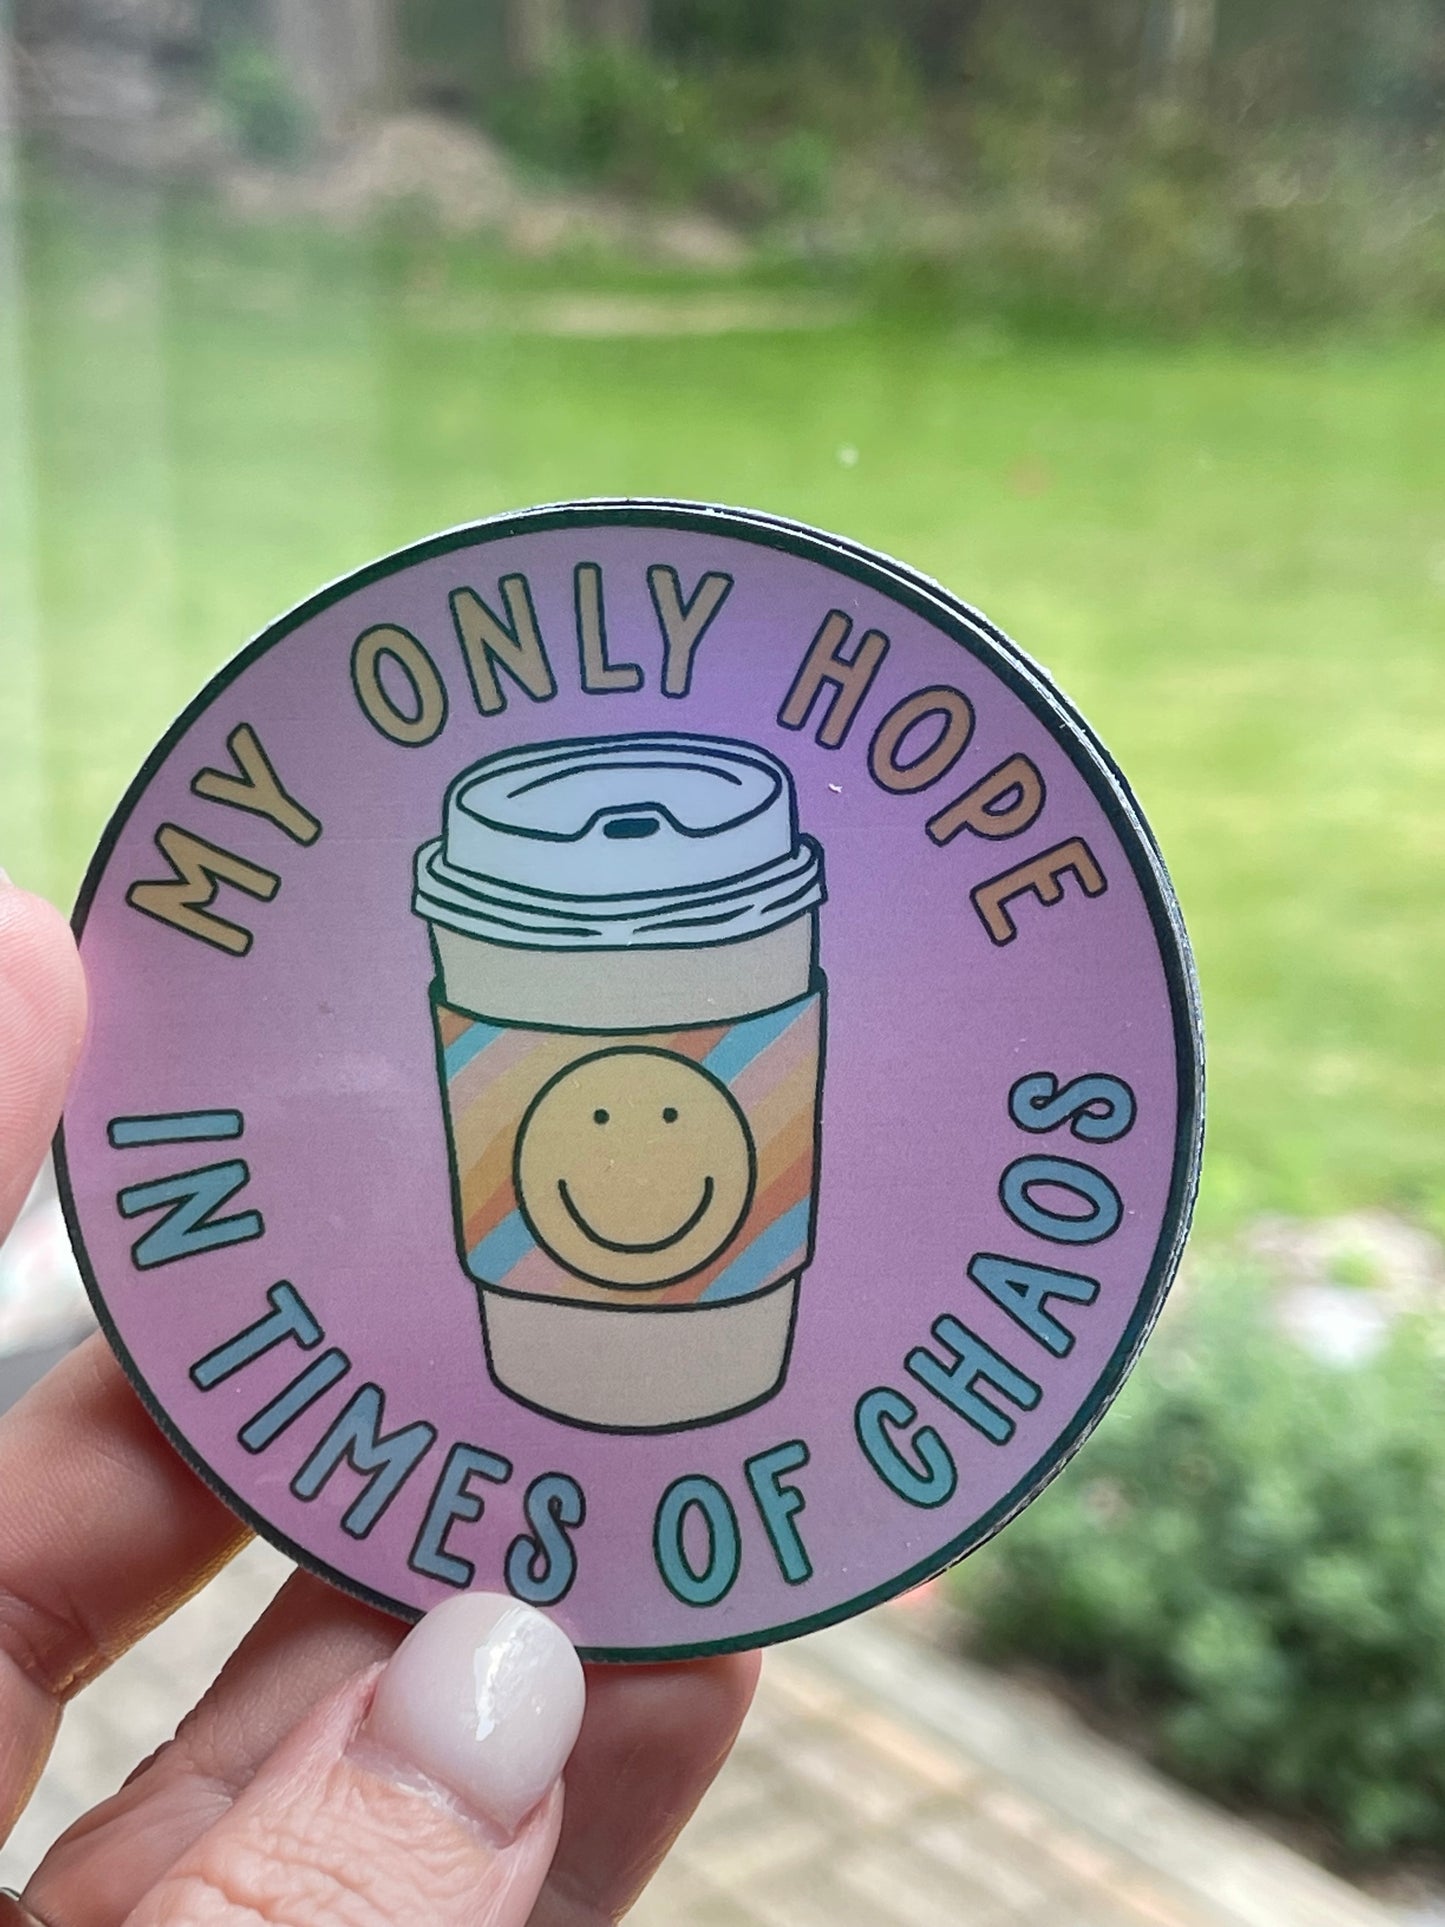 My only hope in time of chaos. Sticker.